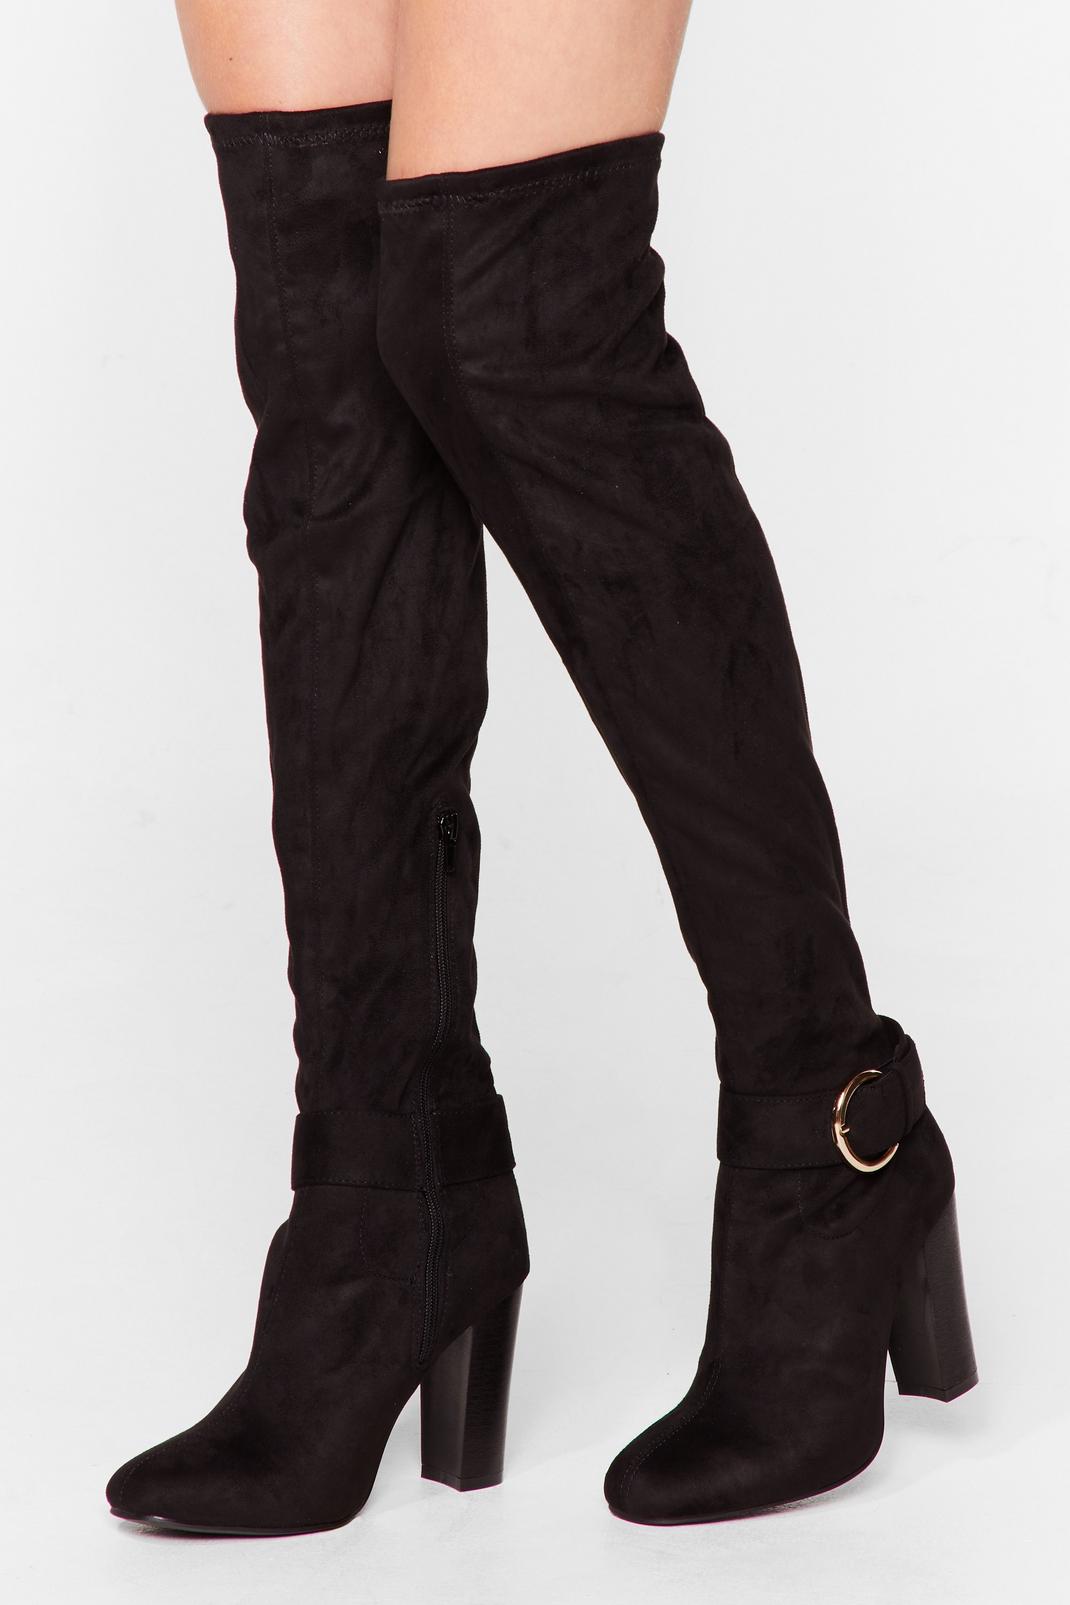 Just Our Buck-le Faux Suede Over-the-Knee Boots image number 1